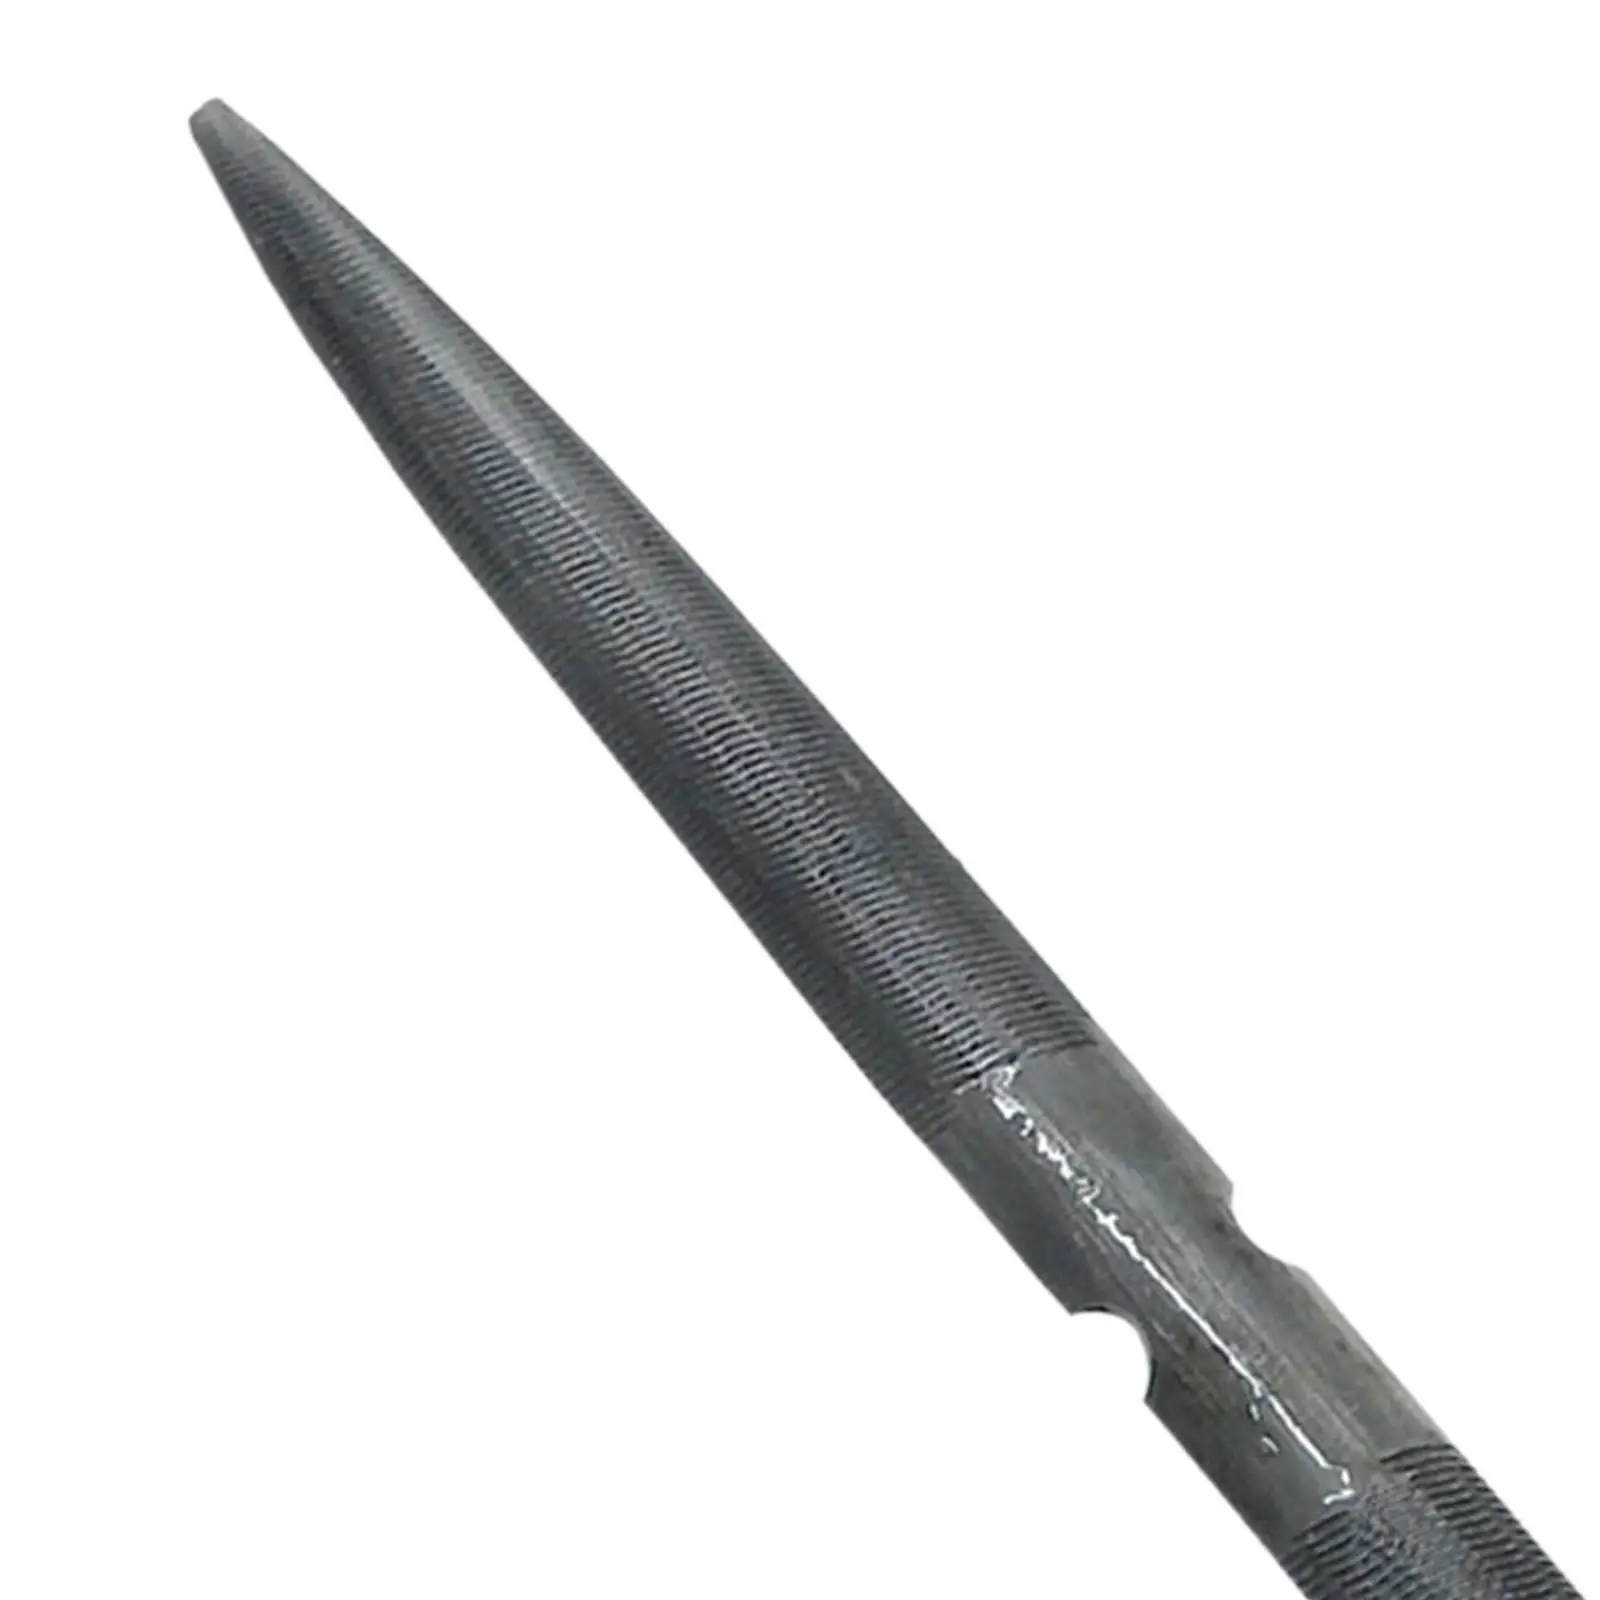 8 Inch Double Head Half Round Files Sharp Steel Flat waxes File for waxes Models Plastics Wood Jewelry DIY Carving Tool